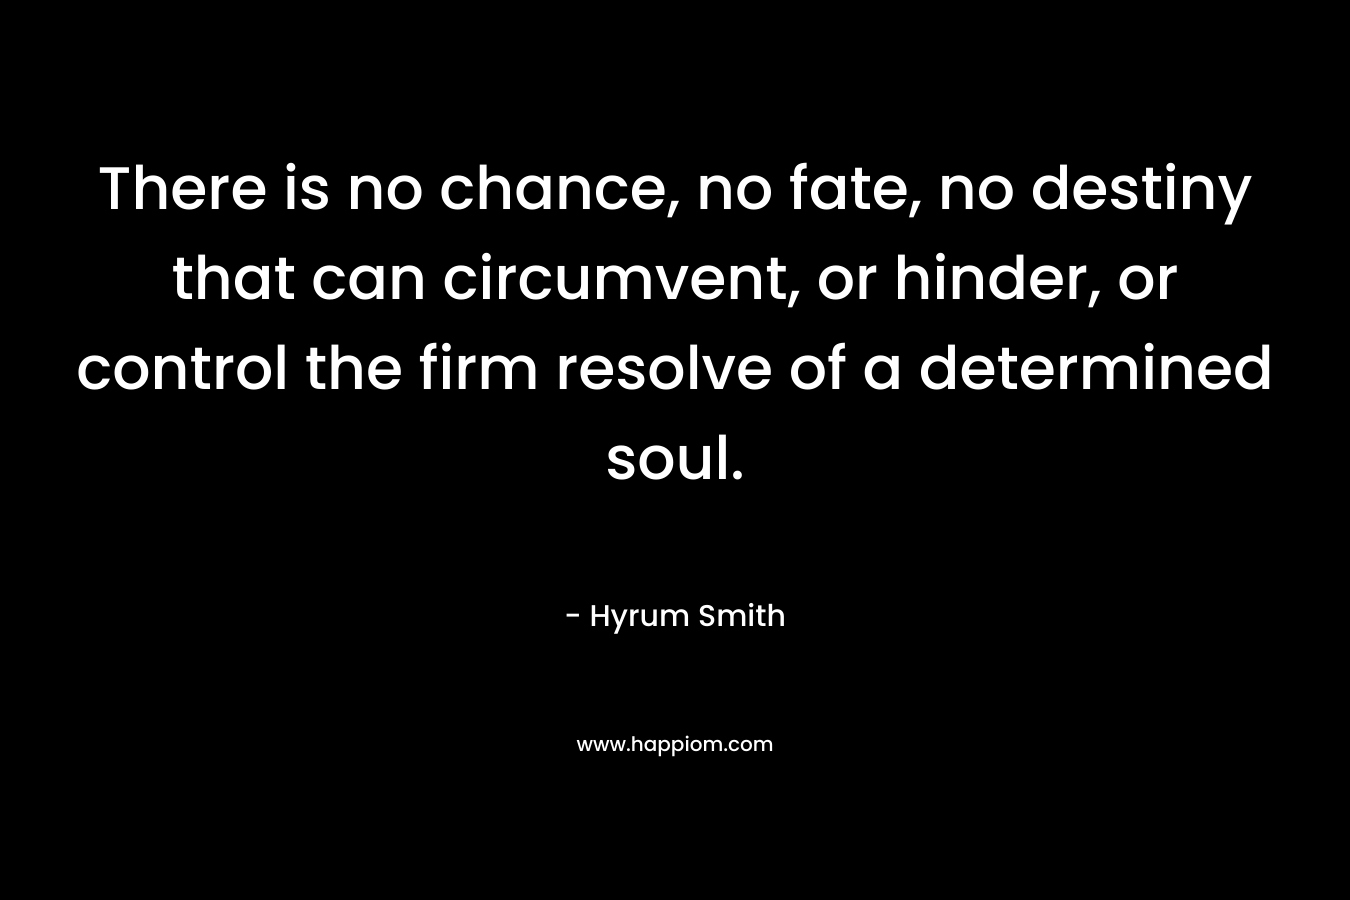 There is no chance, no fate, no destiny that can circumvent, or hinder, or control the firm resolve of a determined soul. – Hyrum Smith